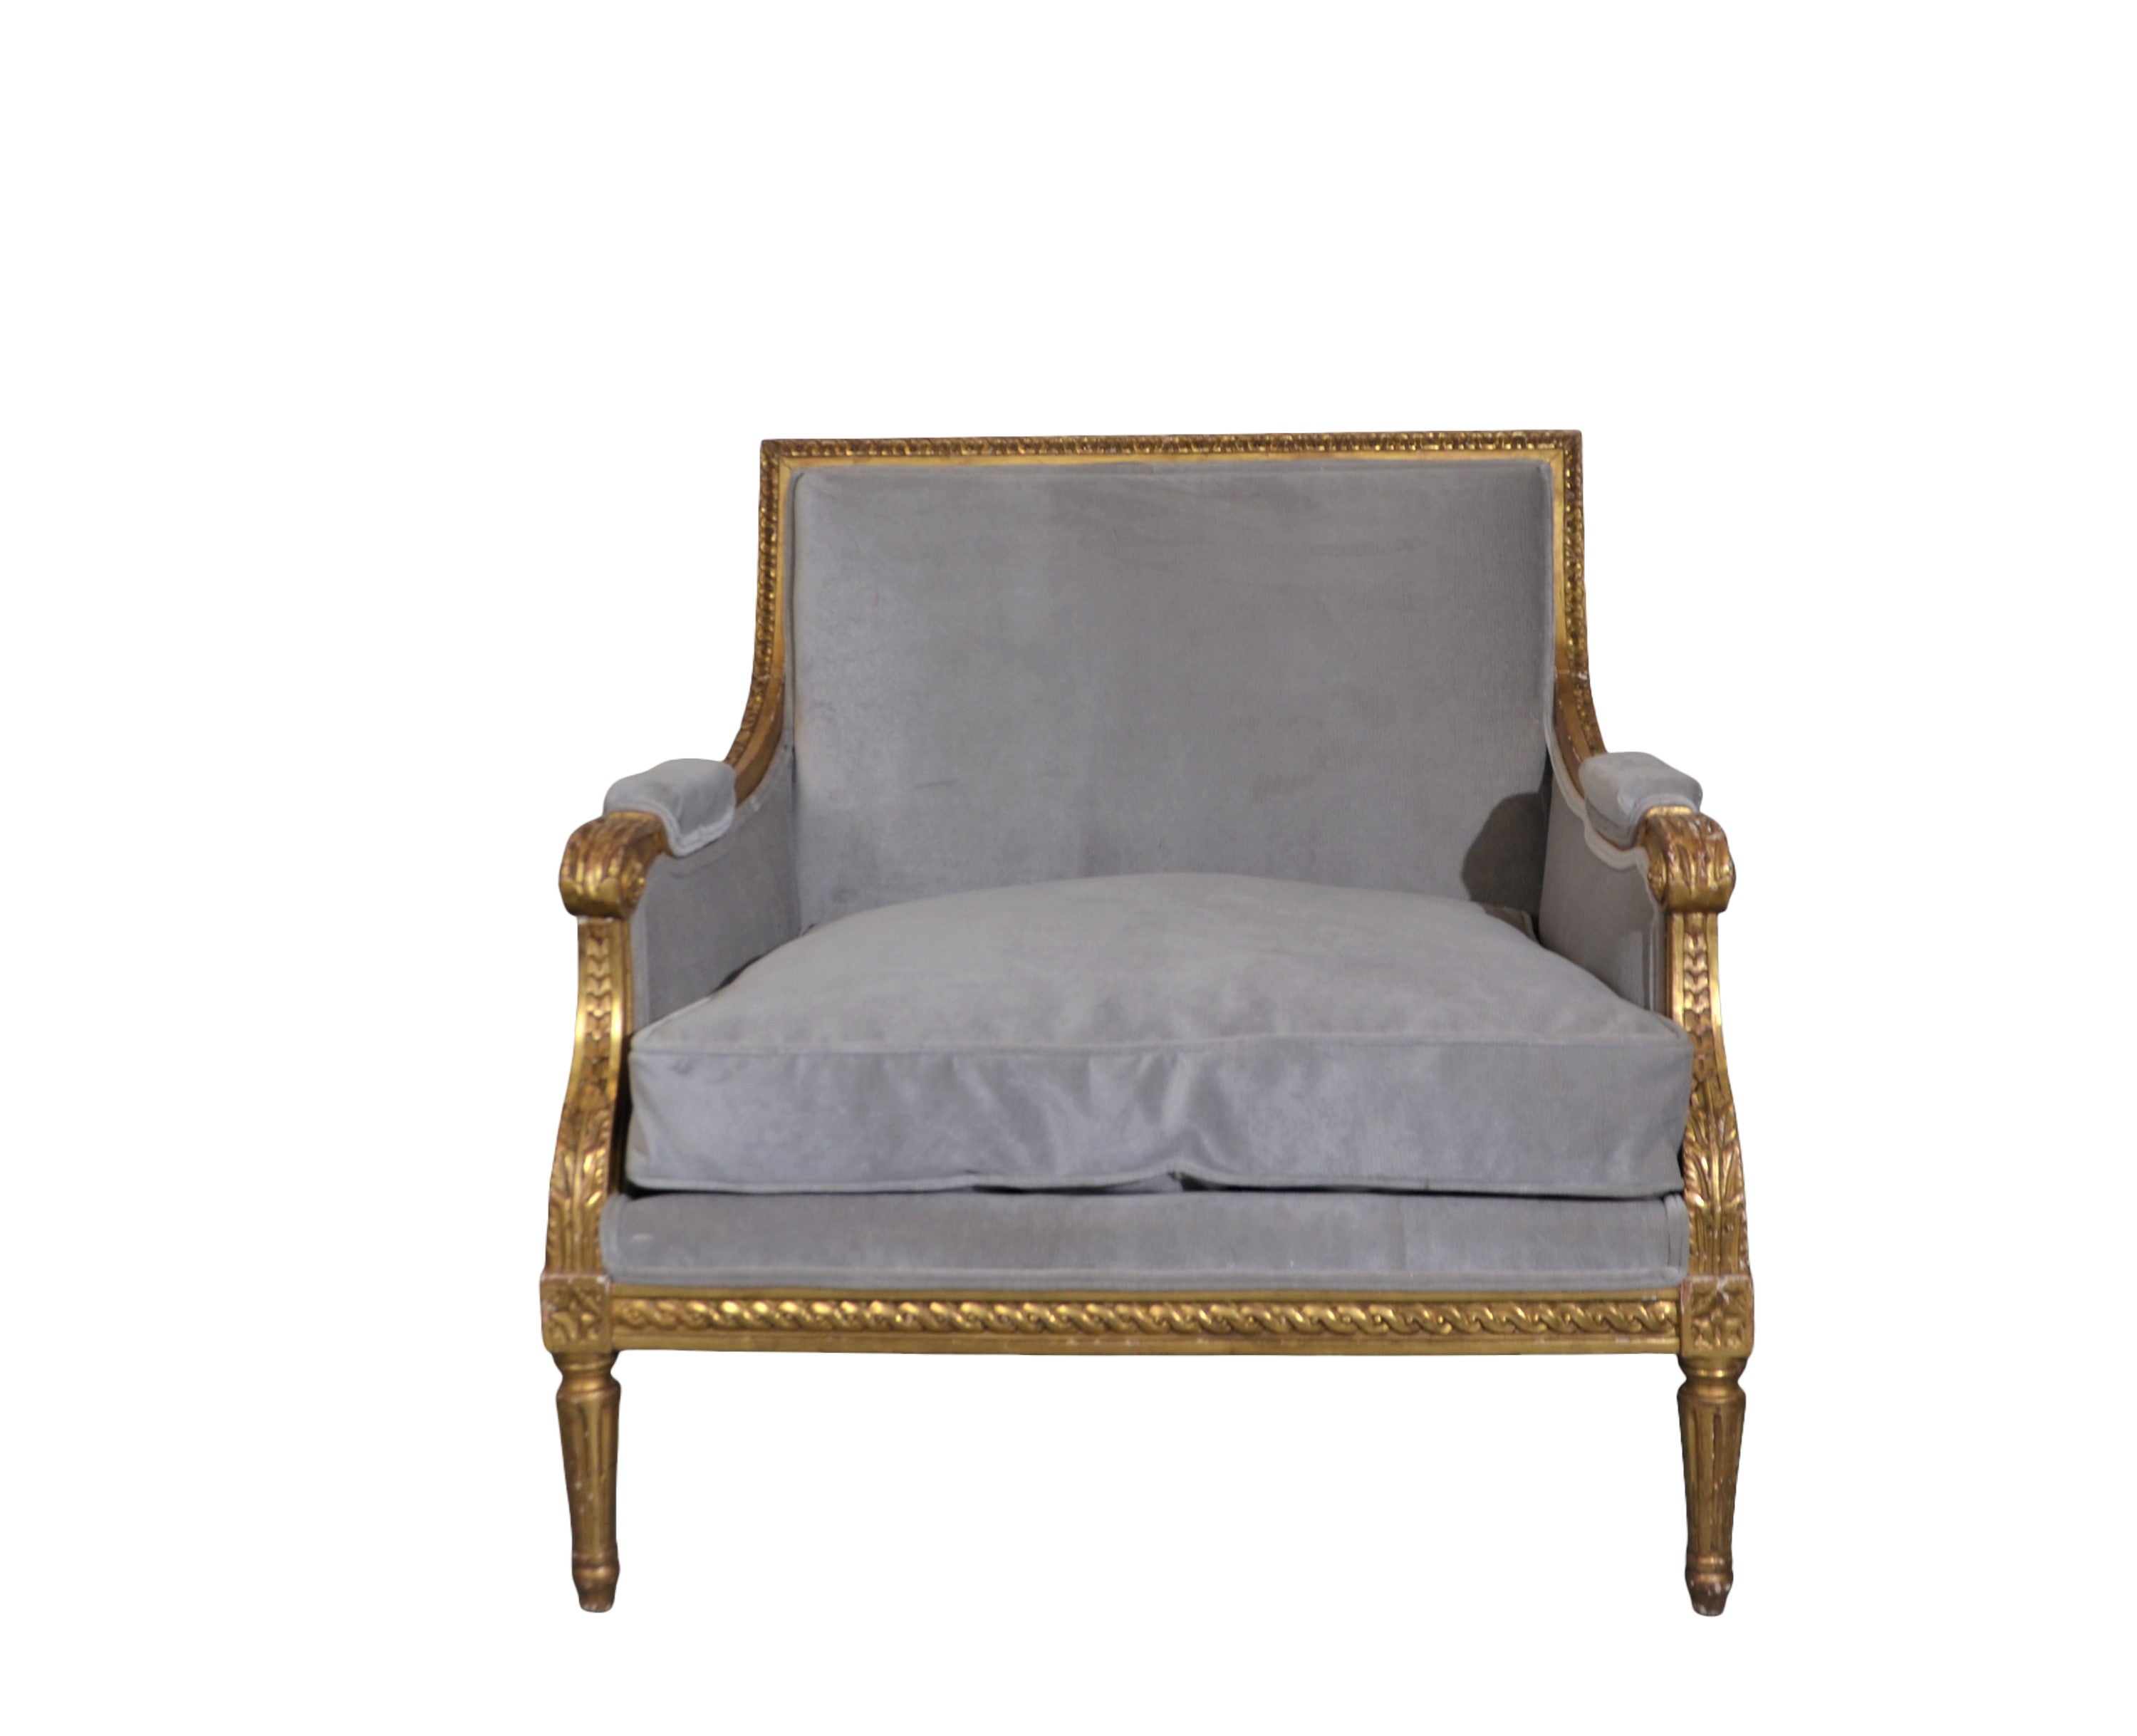 Louis xvi style oversize accent chair. Carved wood frame gilded finish and upholstered in velvet fabric.